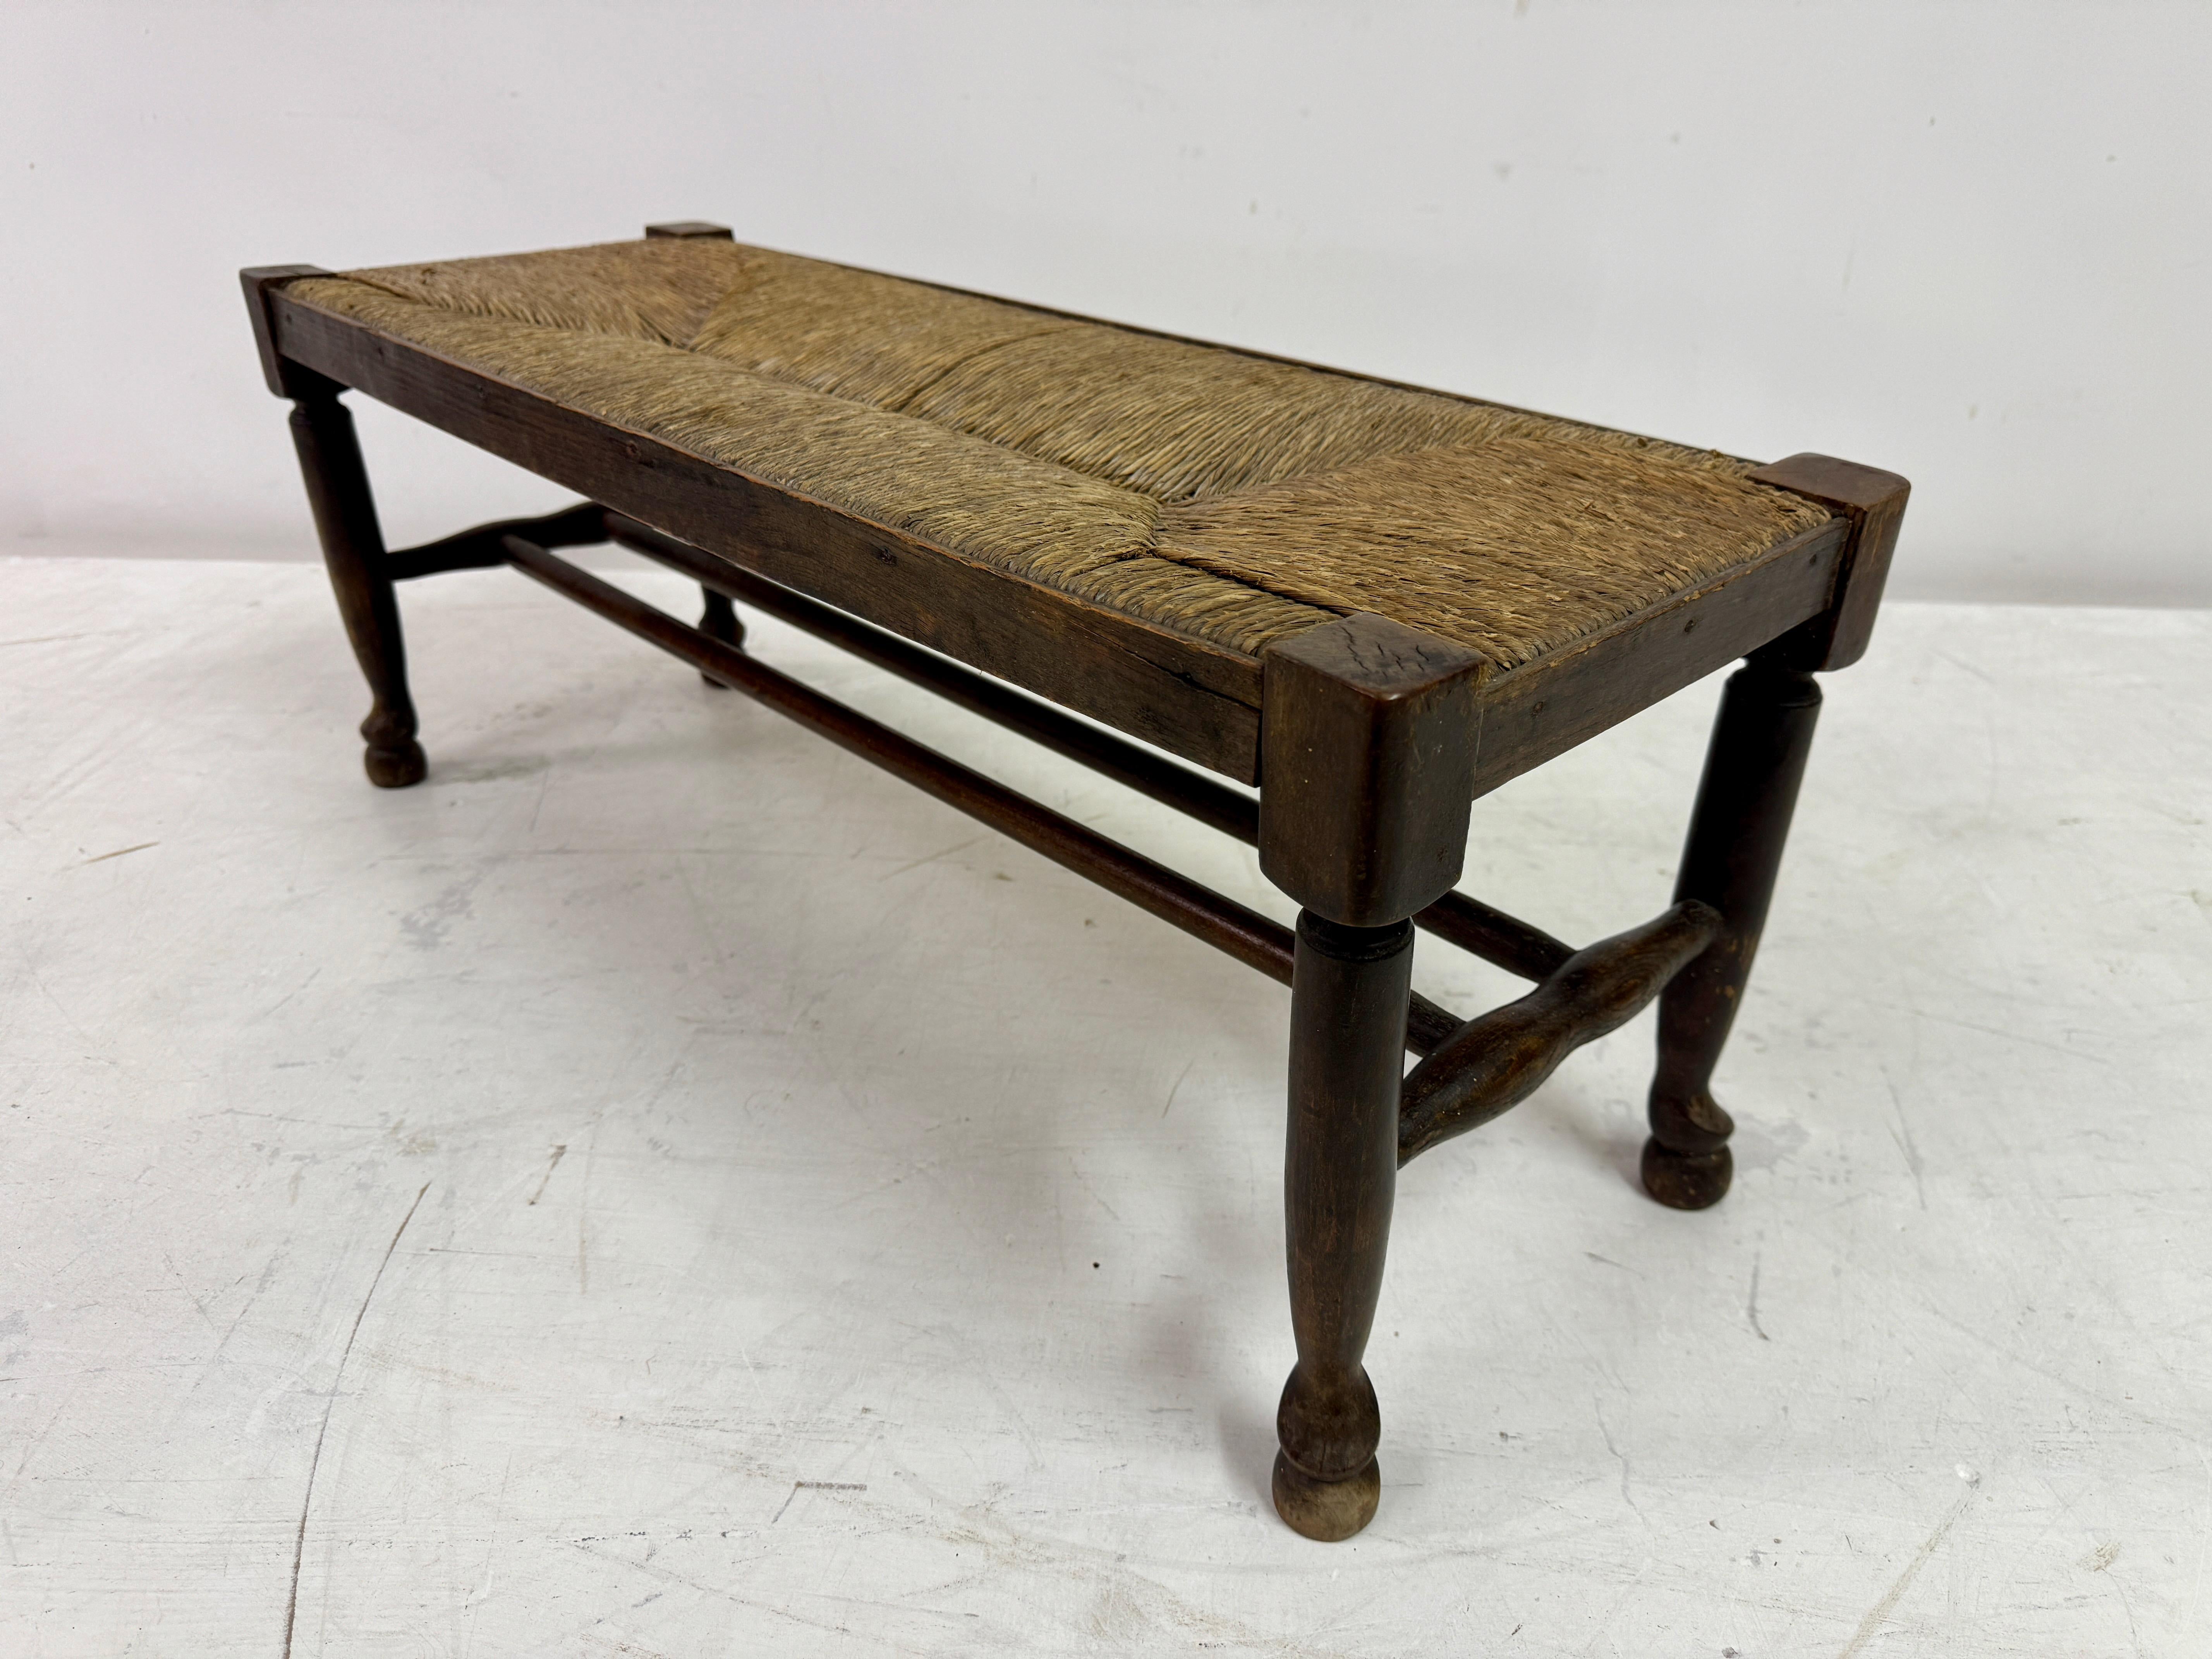 20th Century Antique Bench or Stool with Rush Seat